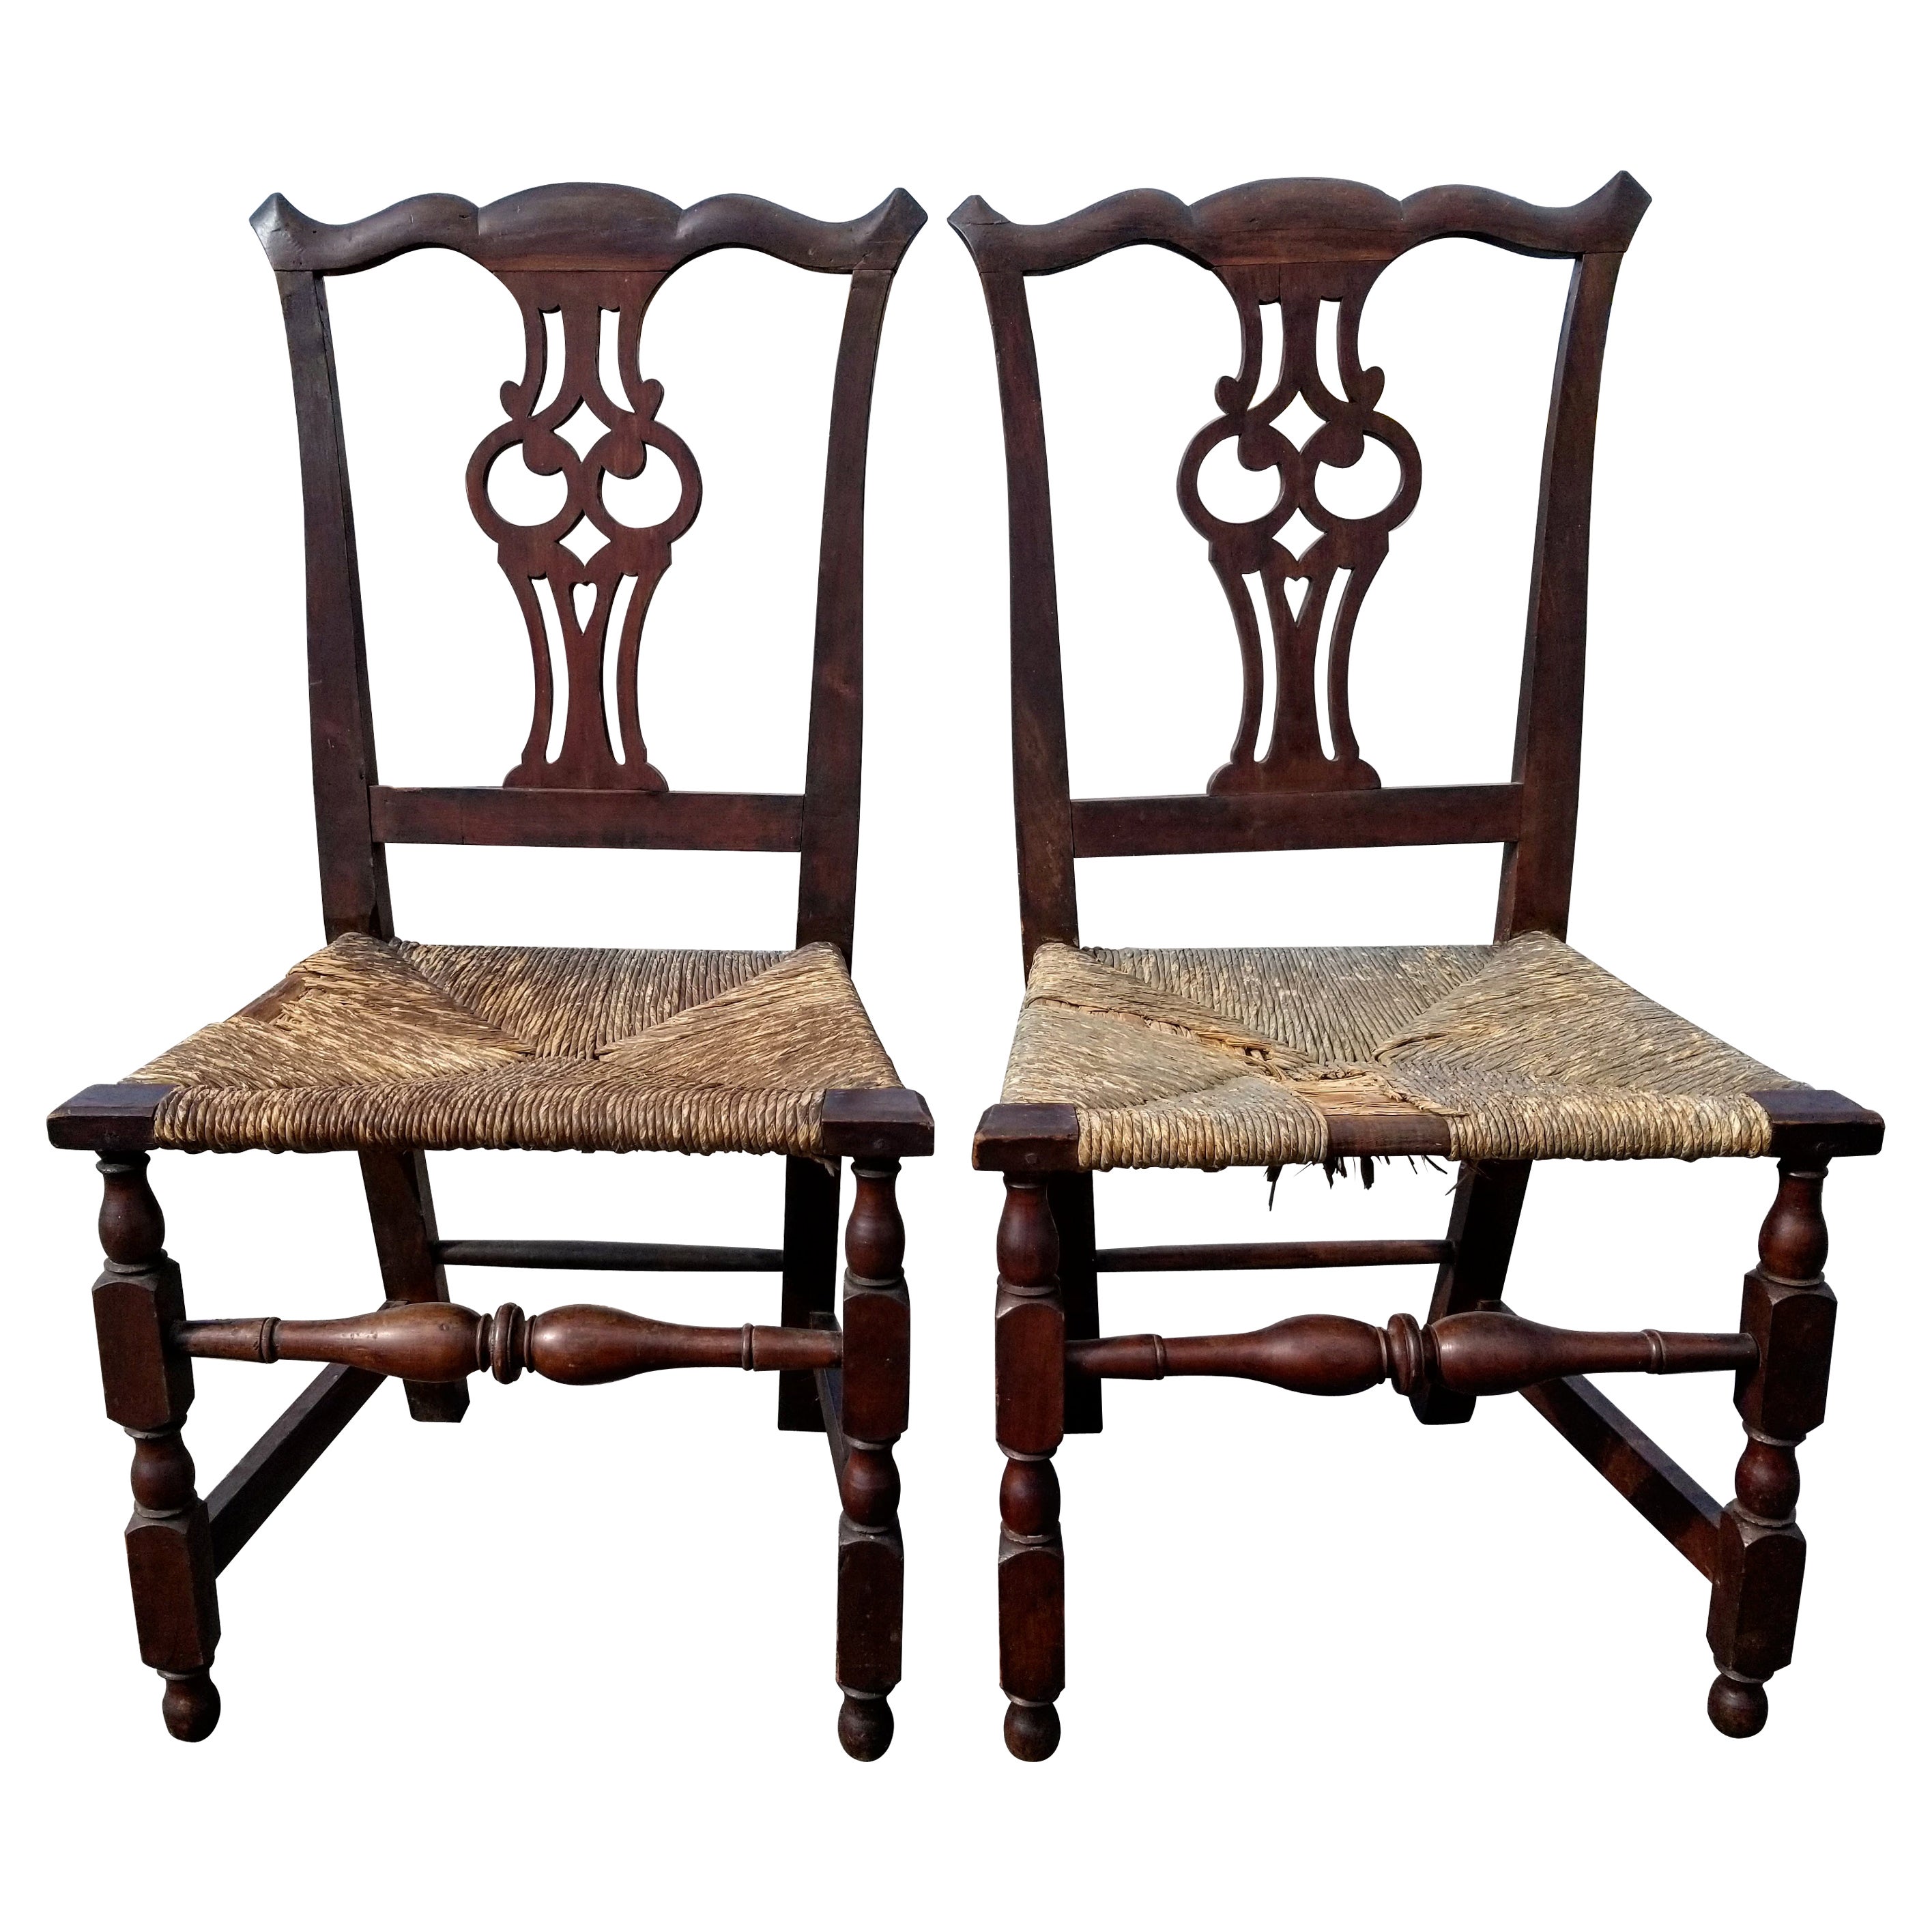 Matched Pair of Chippendale Side Chairs, Massachusetts, Mid 18th Century For Sale